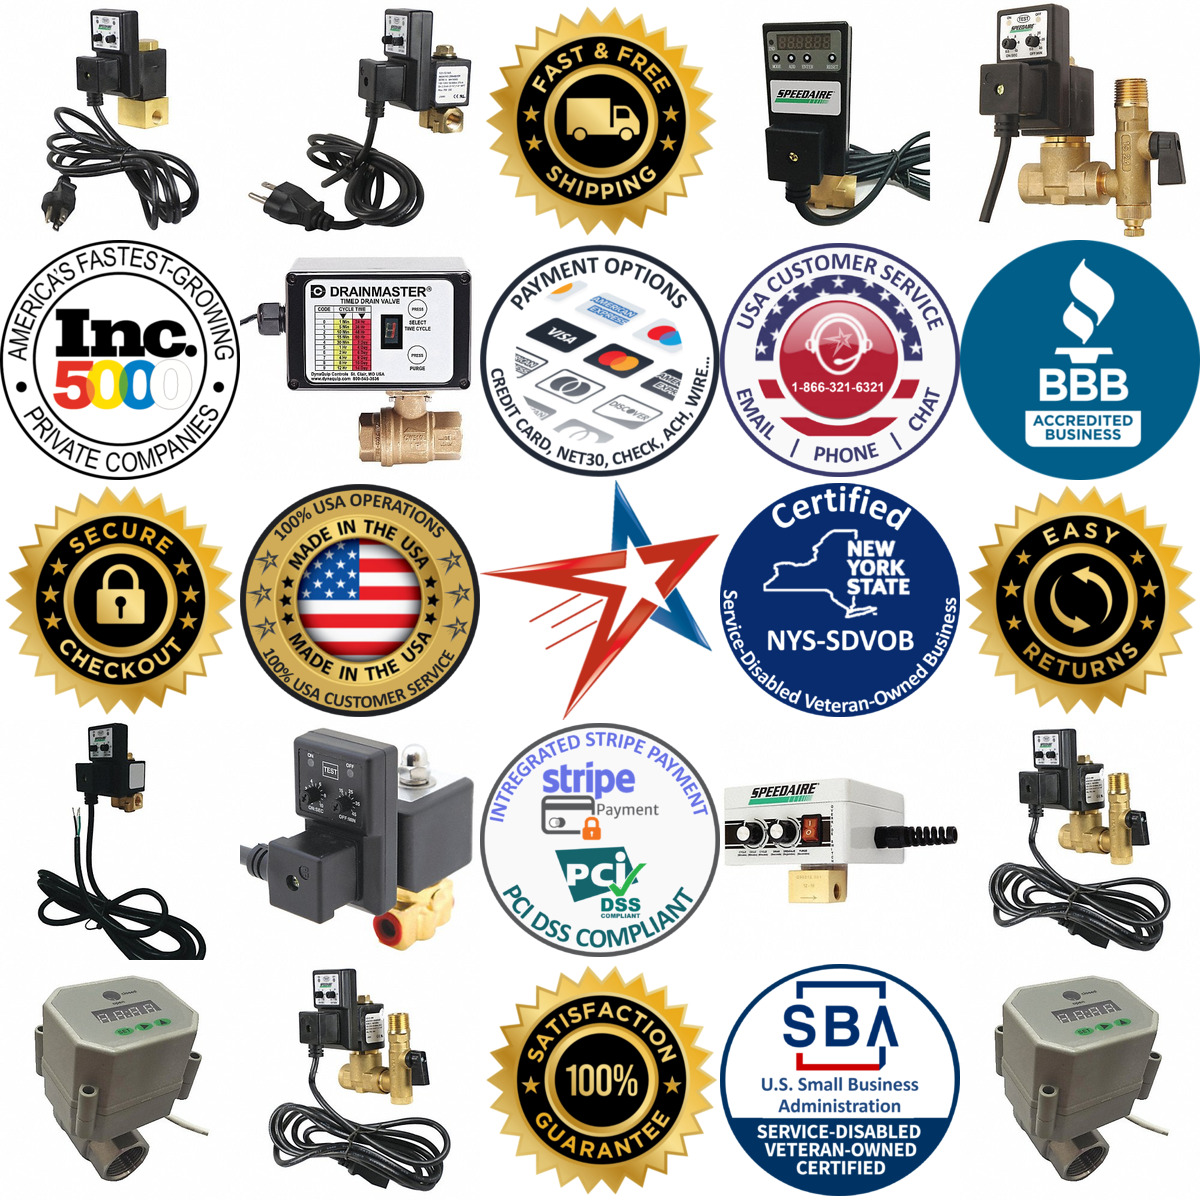 A selection of Timed Electric Auto Drain Valves products on GoVets